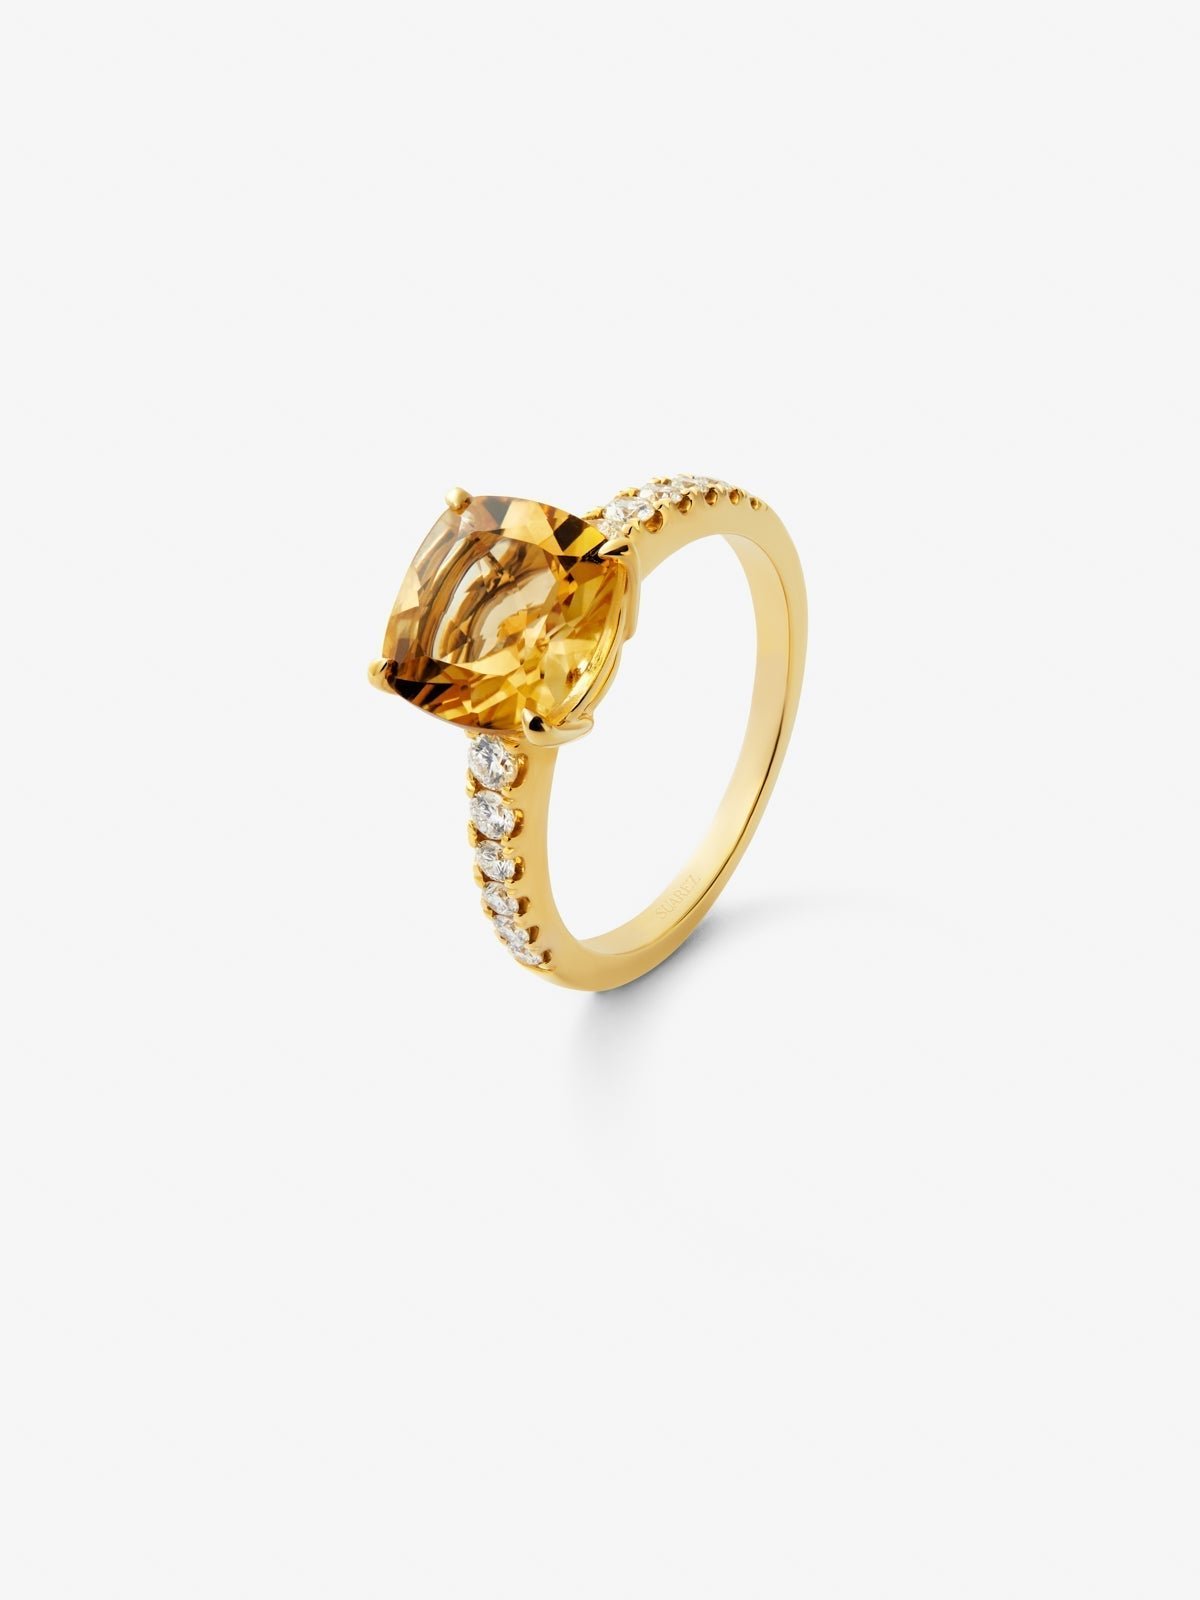 18K yellow gold ring with cushion-cut citrine quartz of 2.7 cts and 12 brilliant-cut diamonds with a total of 0.3 cts